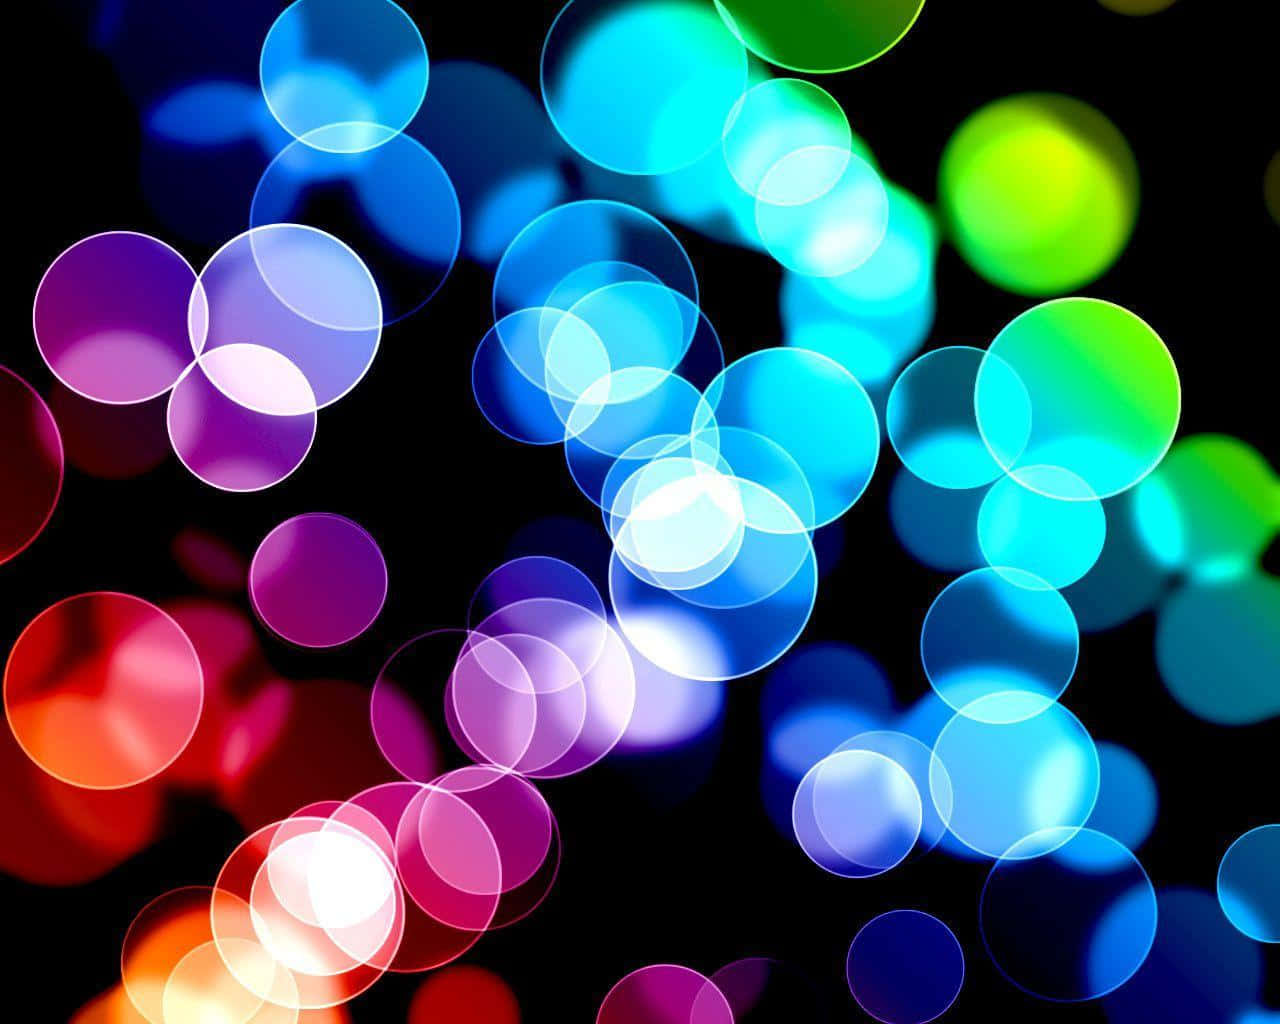 Digital Art Of Cool Colored Blurred Light Abstract Wallpaper